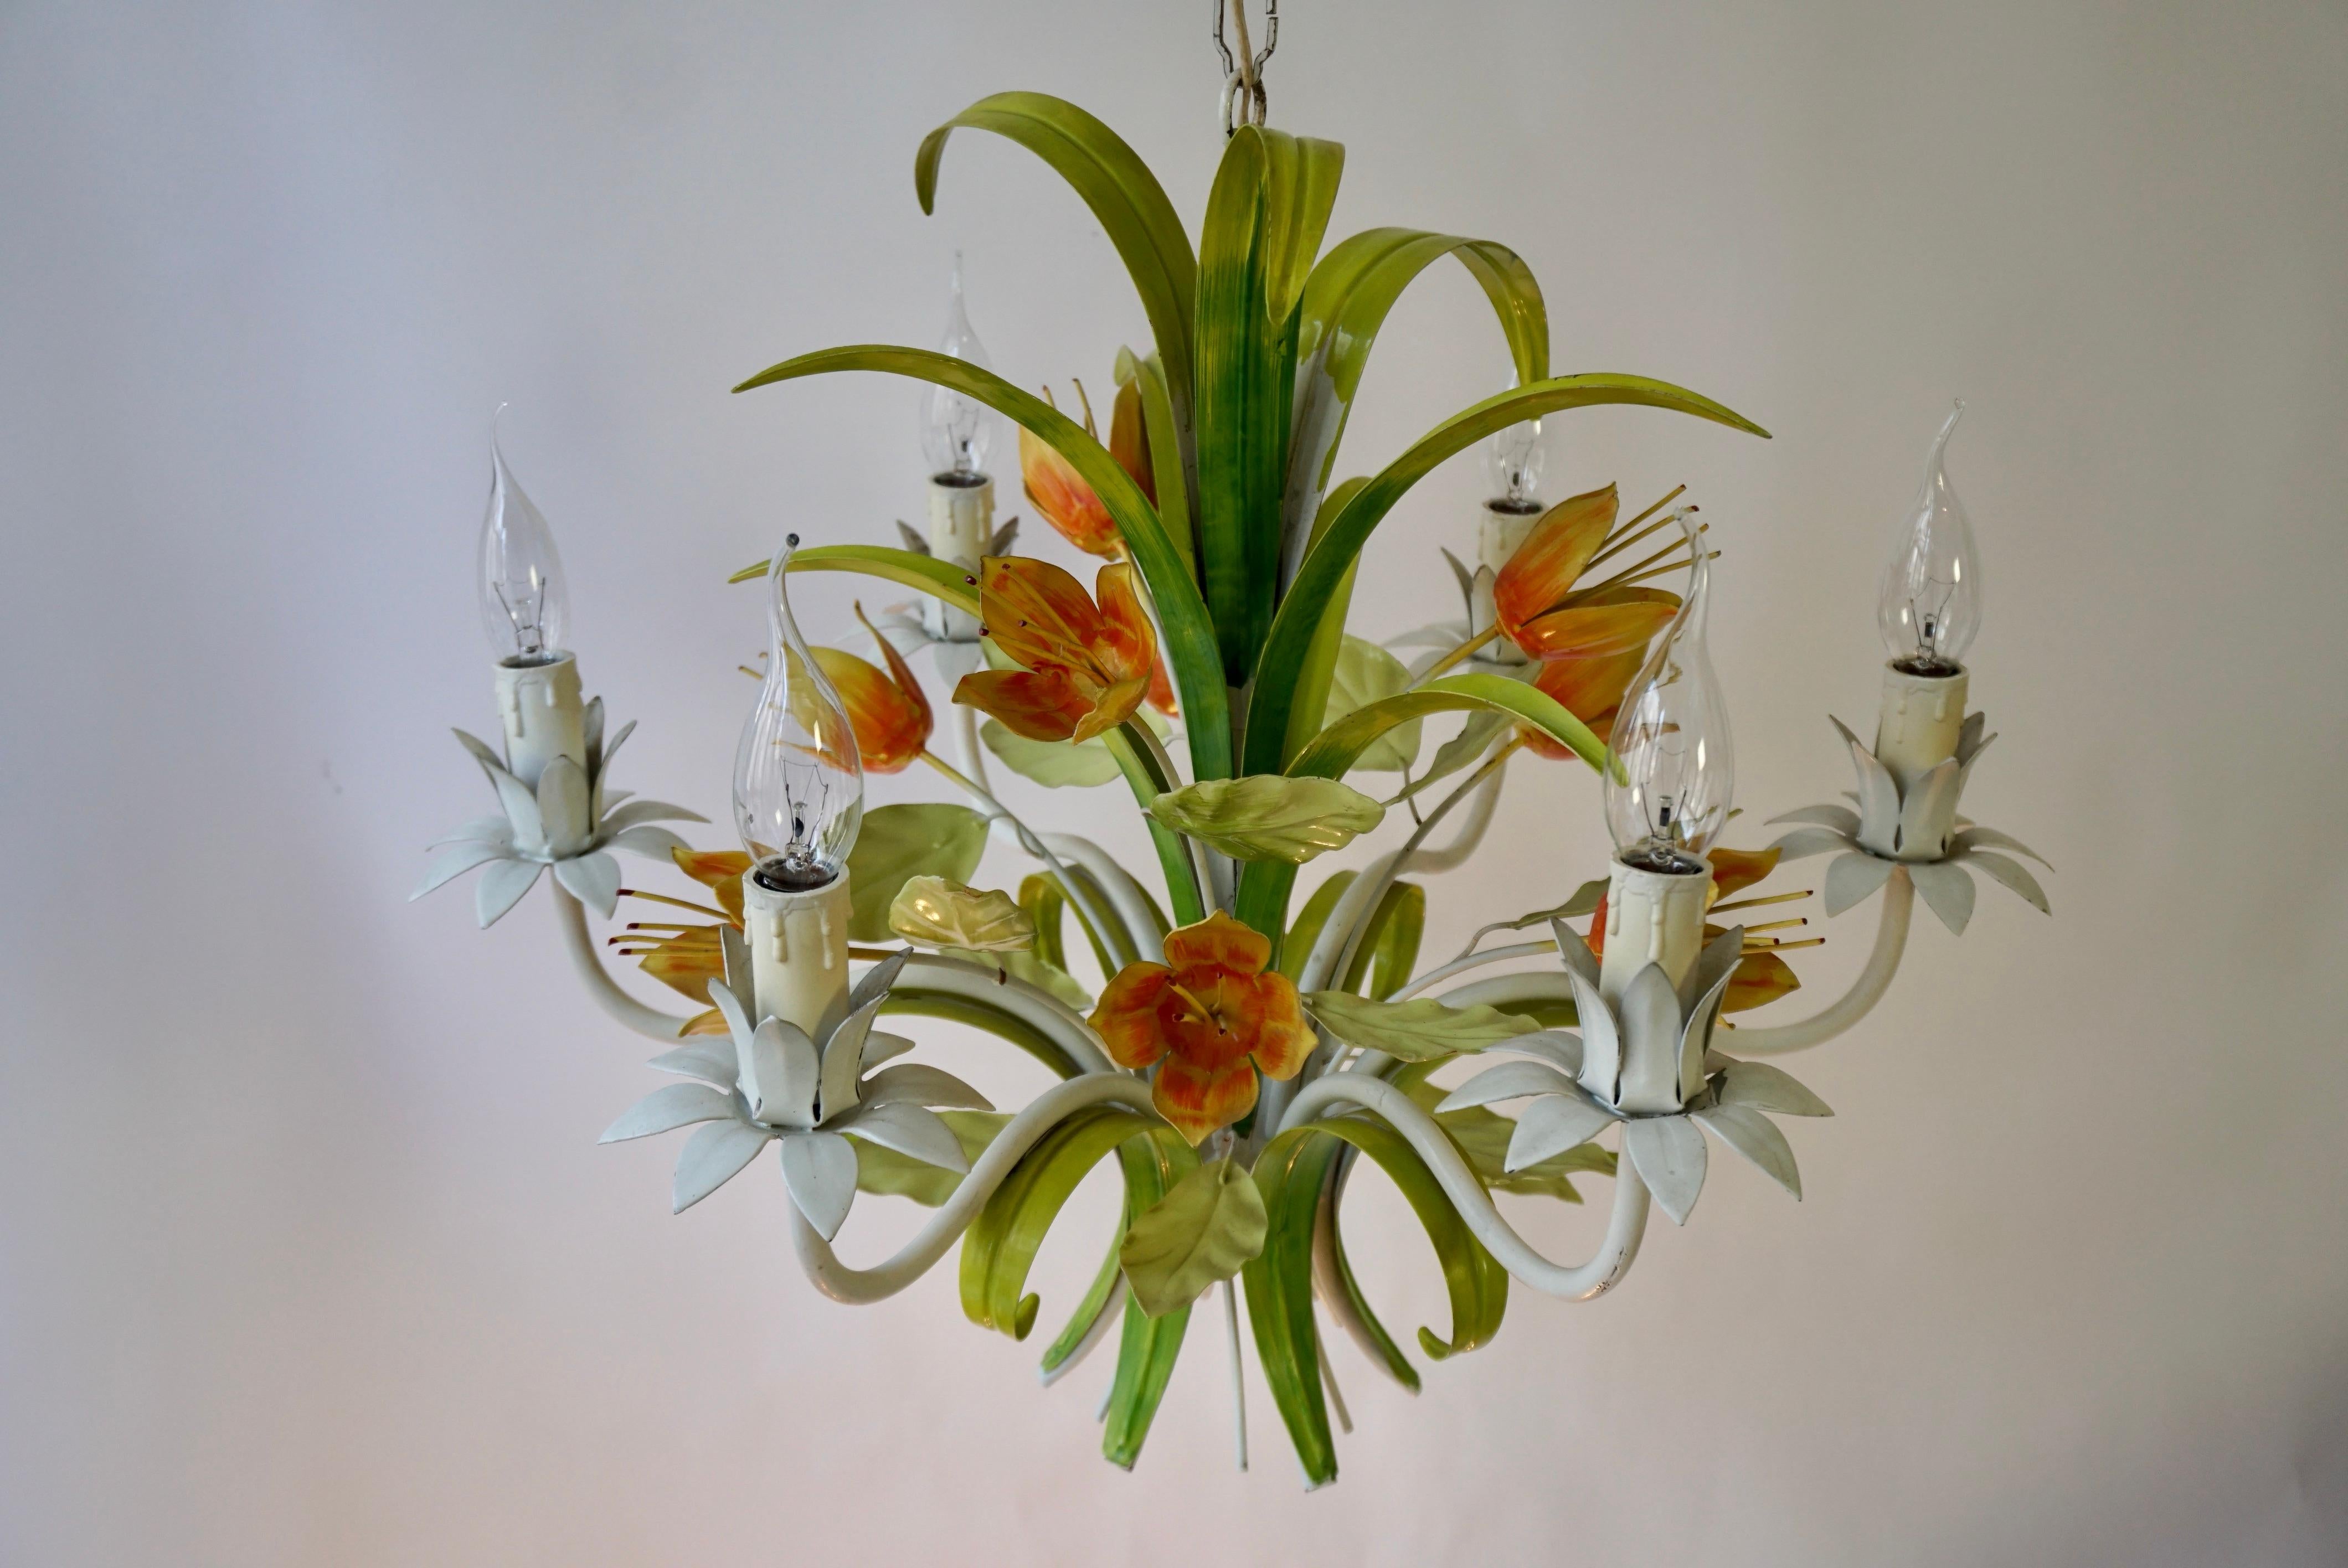 1960s Bright Boho Chic Italian Tole Painted Metal Chandelier With Floral Decor For Sale 5